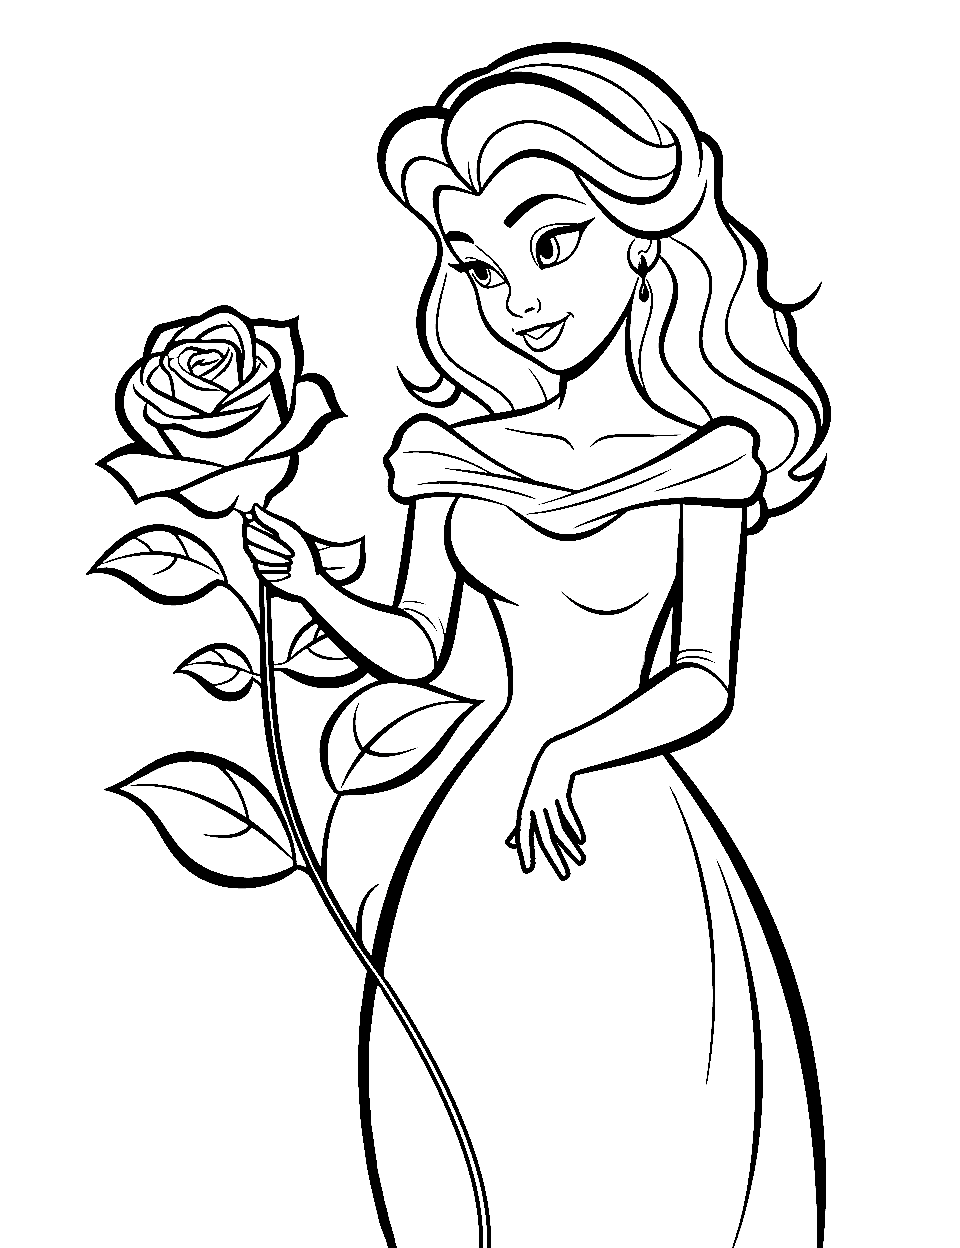 Disney Princess with a Rose Coloring Page - A Disney princess tending her big magical blooming rose.